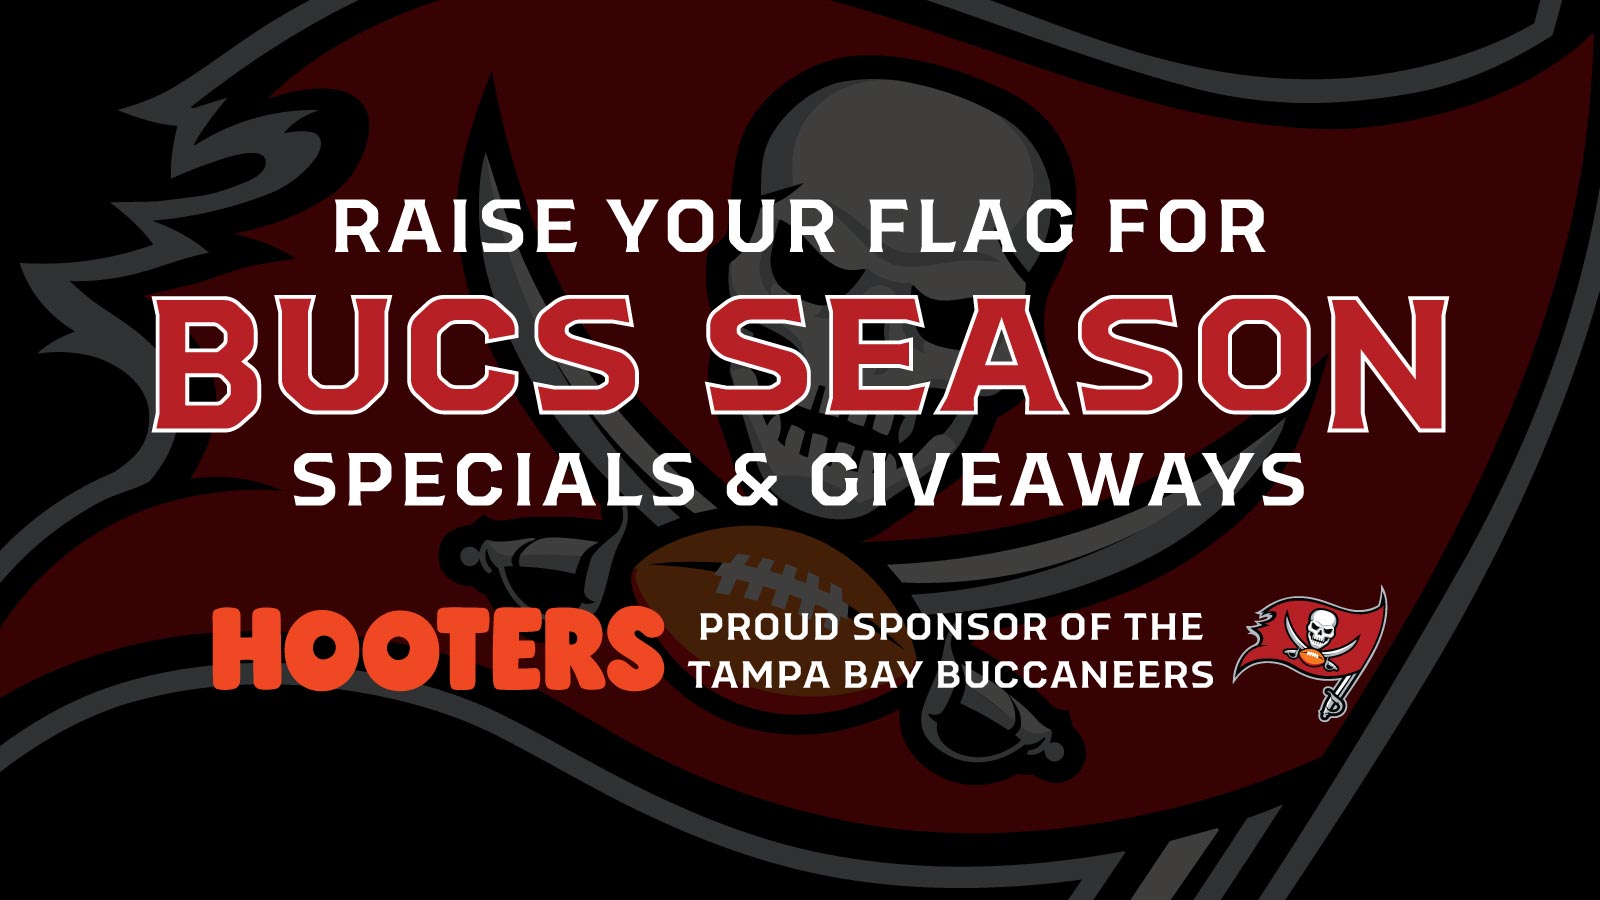 Raise Your Flag for Bucs Season | Specials & Giveaways | Hooters | Proud Sponsor of the Tampa Bay Buccaneers